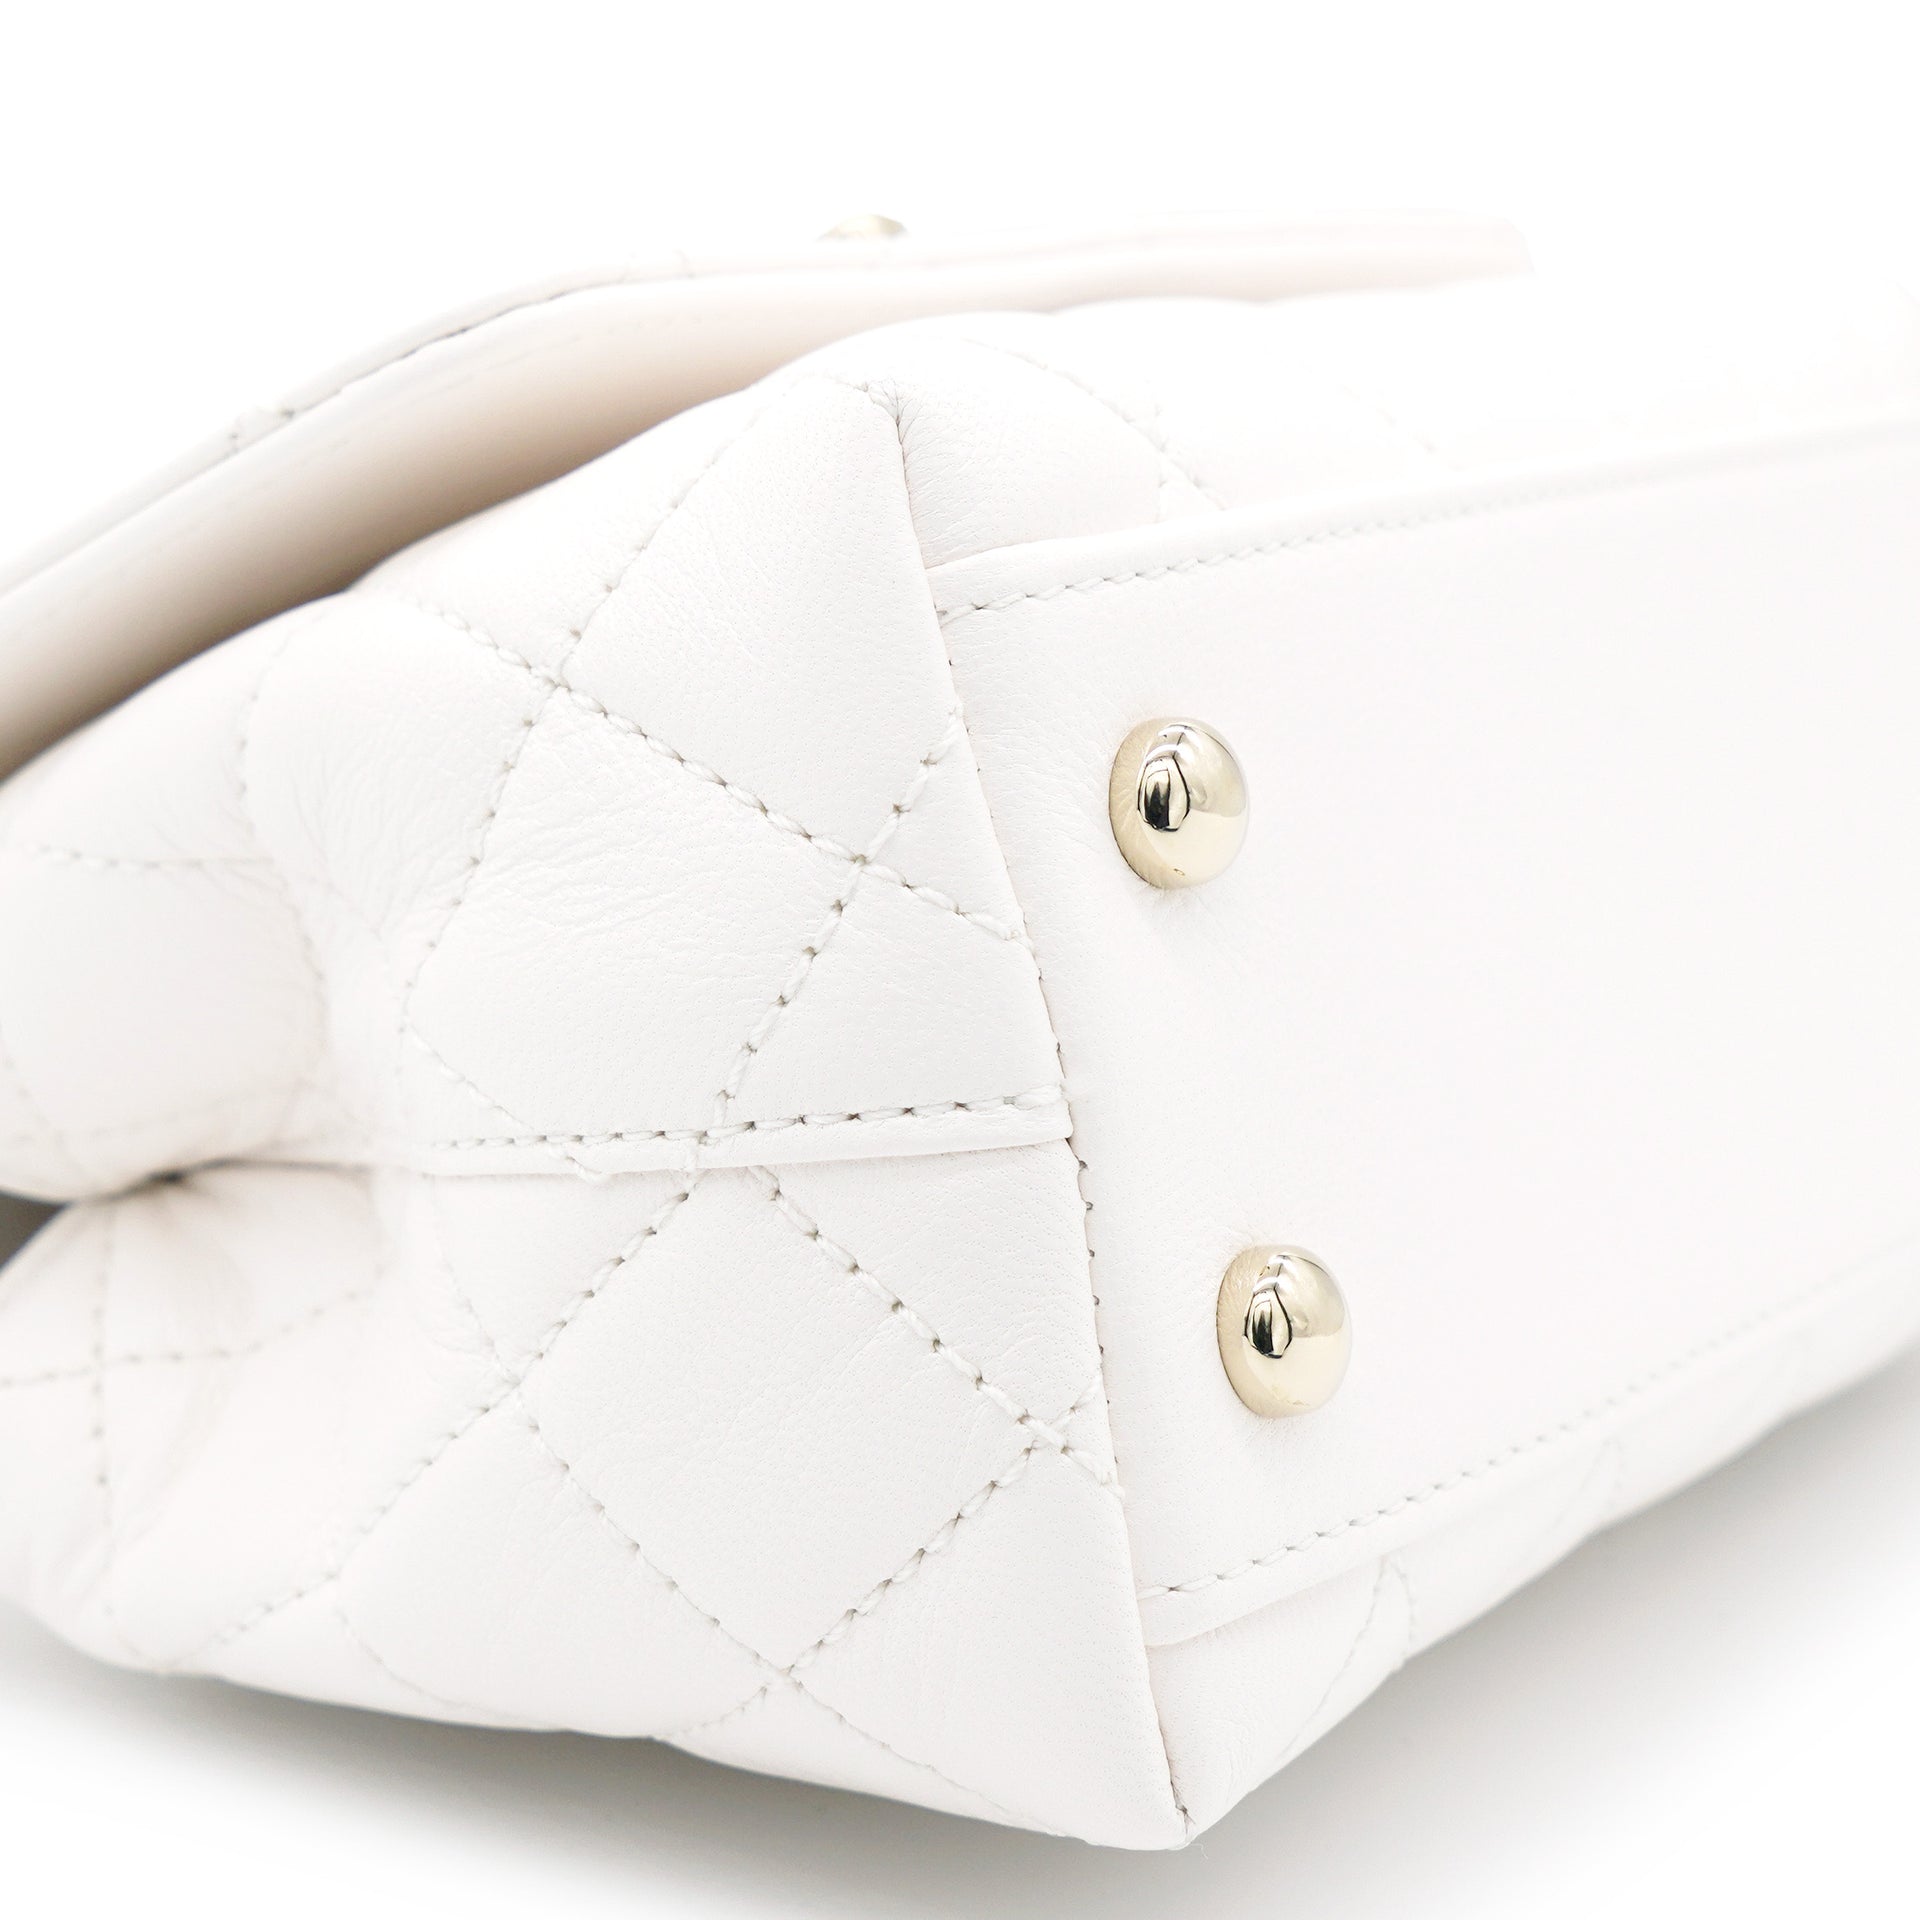 Coco handle leather handbag Chanel White in Leather - 28145089